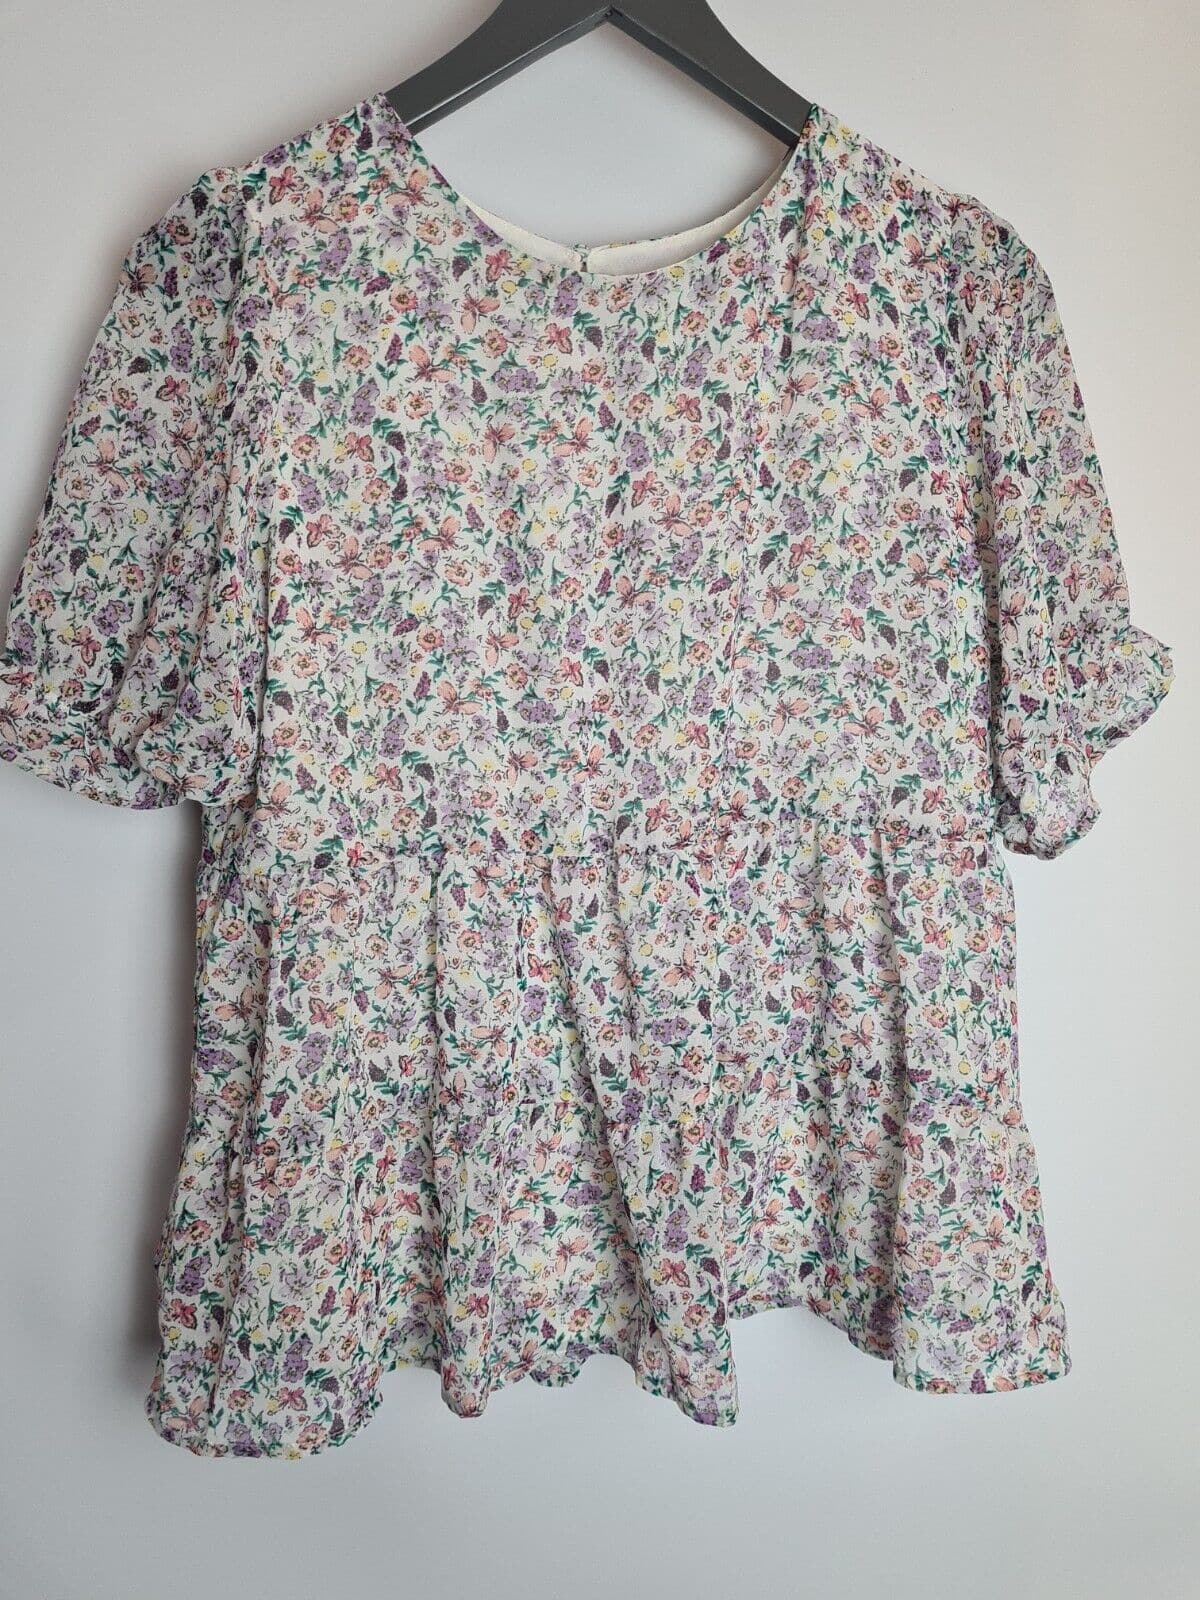 Apricot Floral Ruffle Tiered Top Size 12 **** V80 - Big_Stock_Clearance